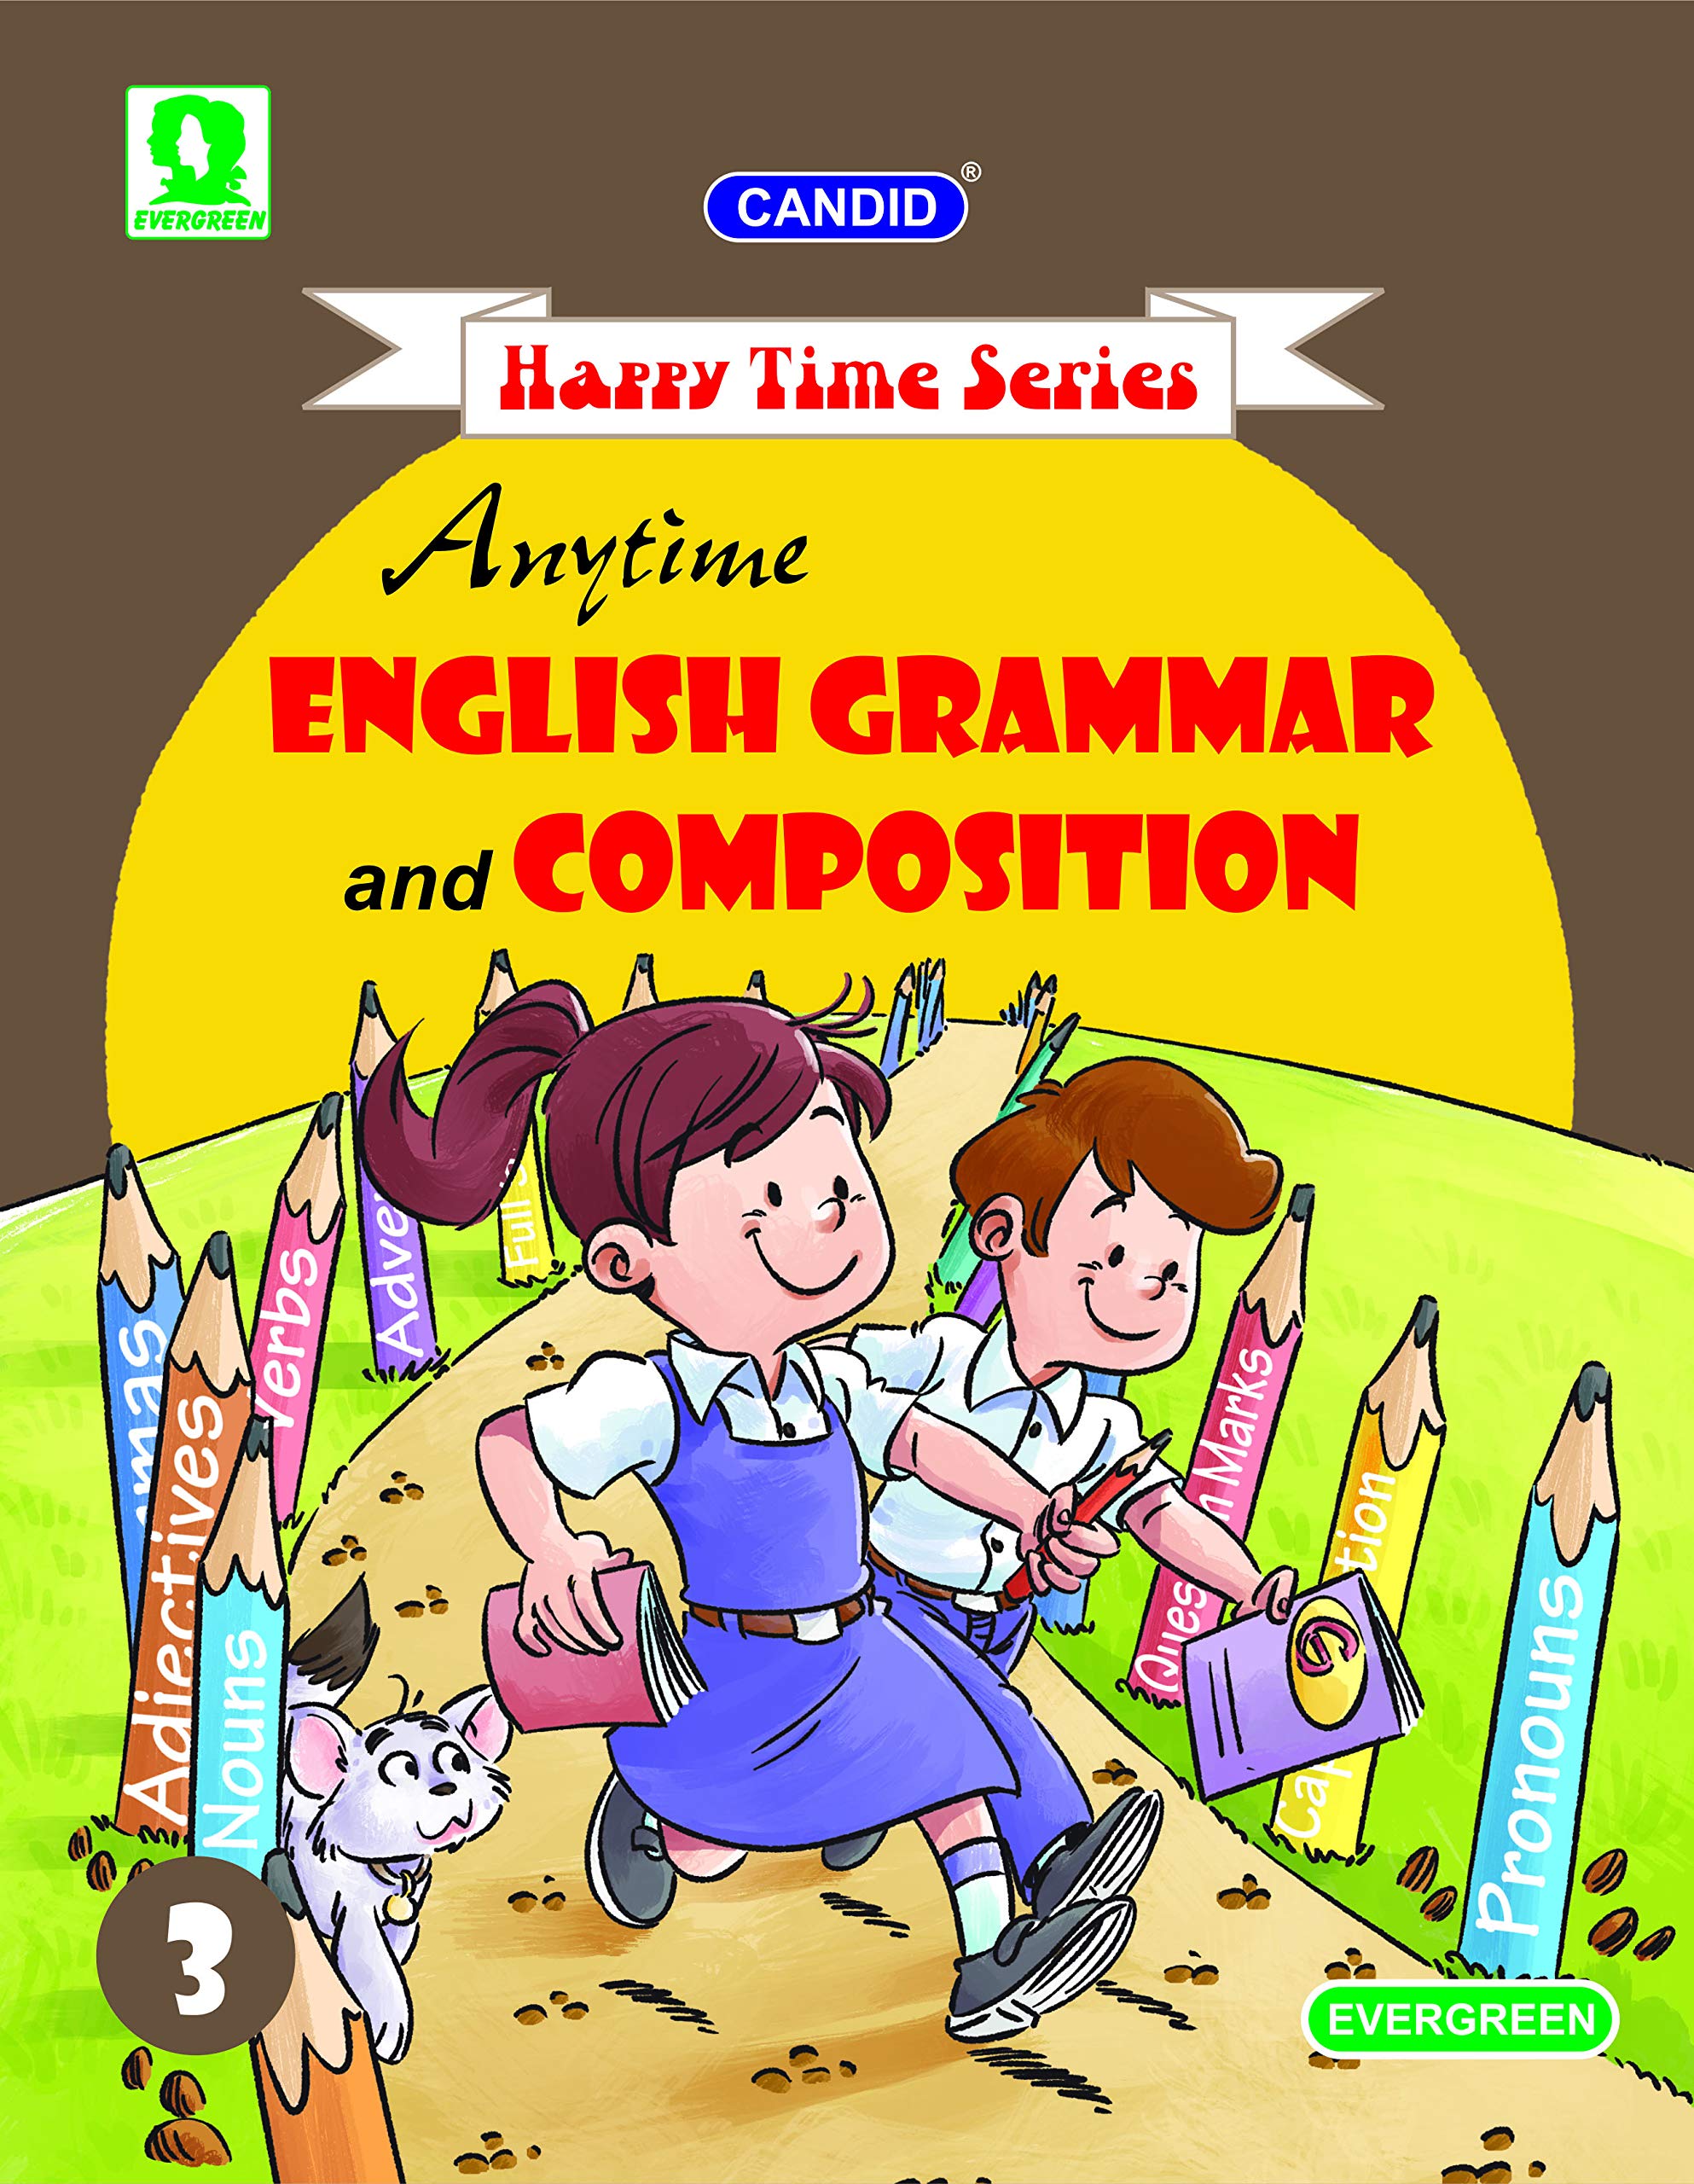 Candid Happy Time Series Anytime English Grammar Composition 